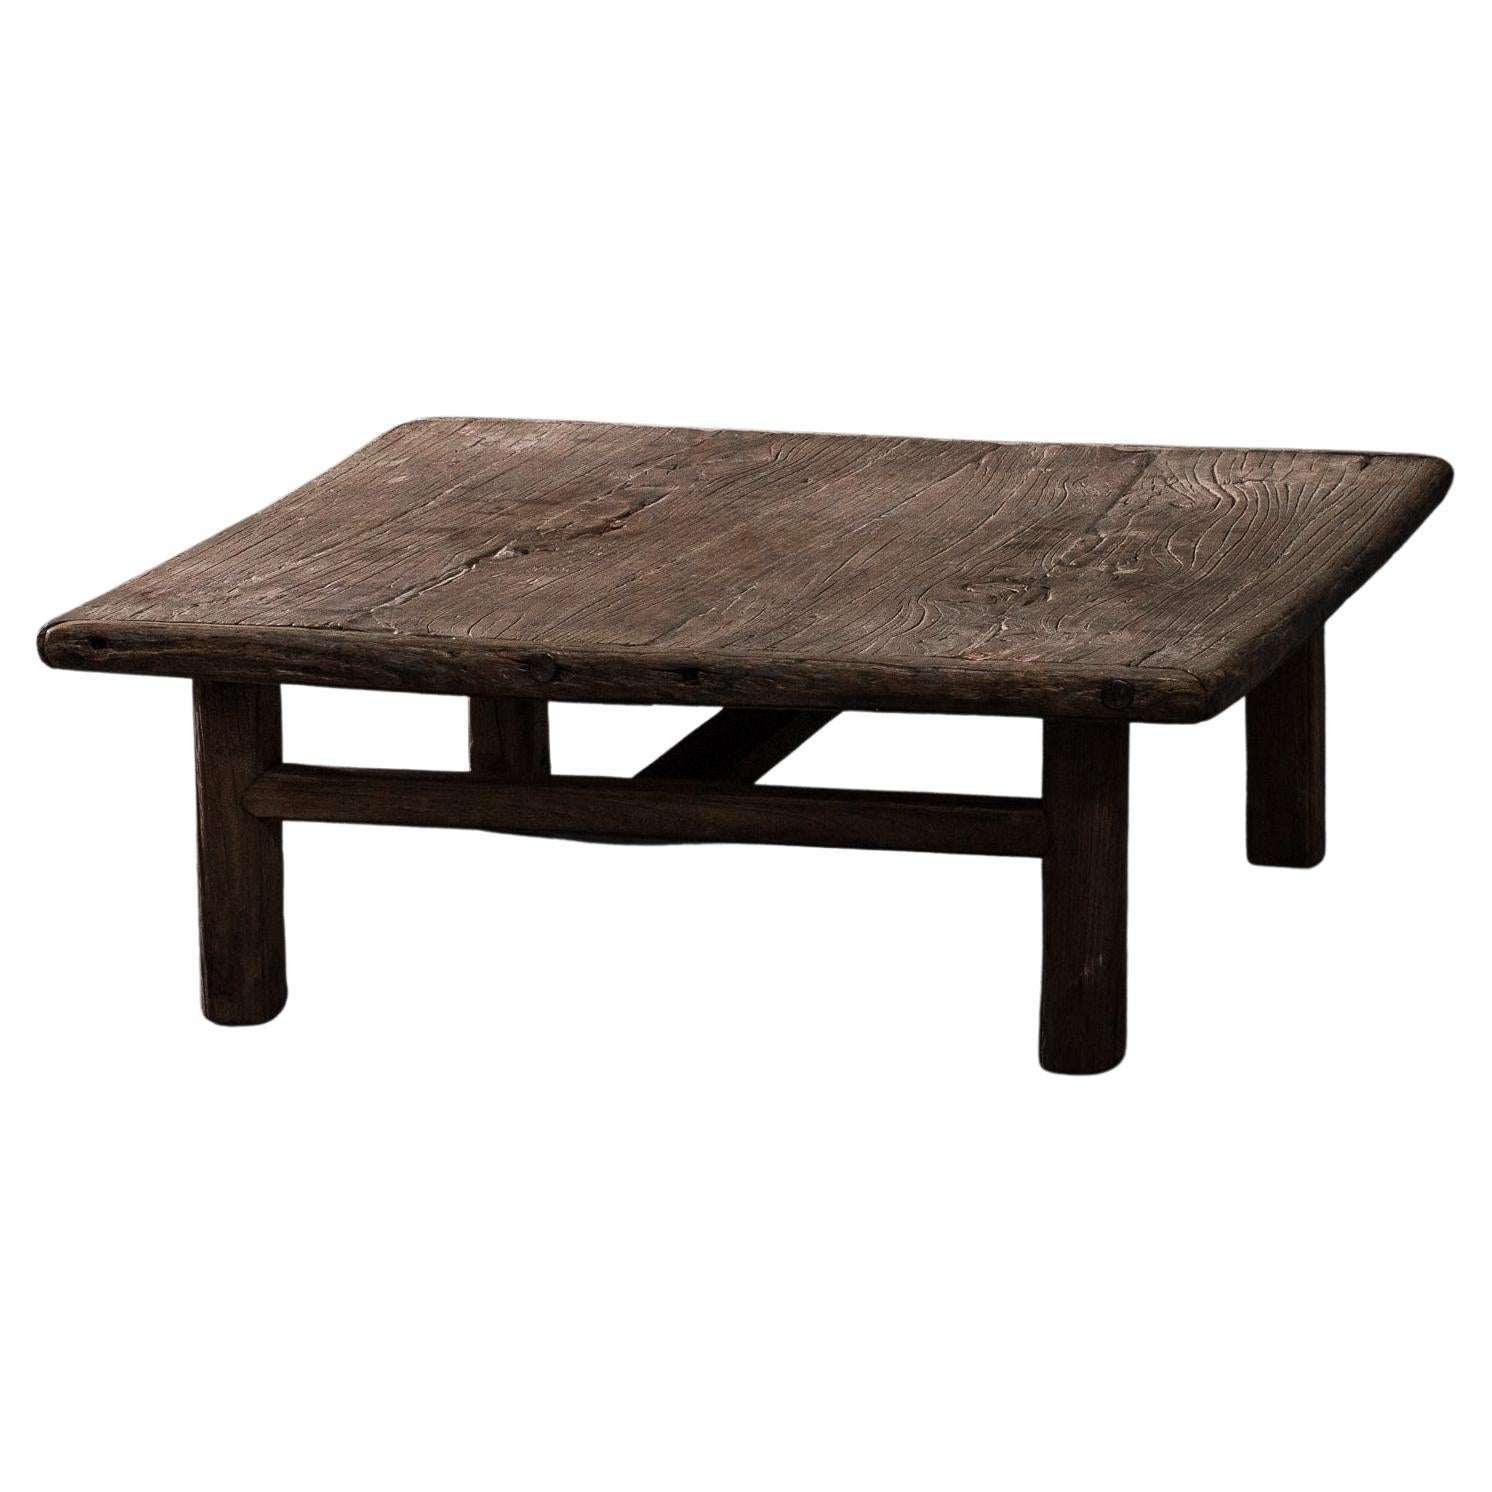 Handcrafted patinated elm coffee table. Made in China circa early 20th century.